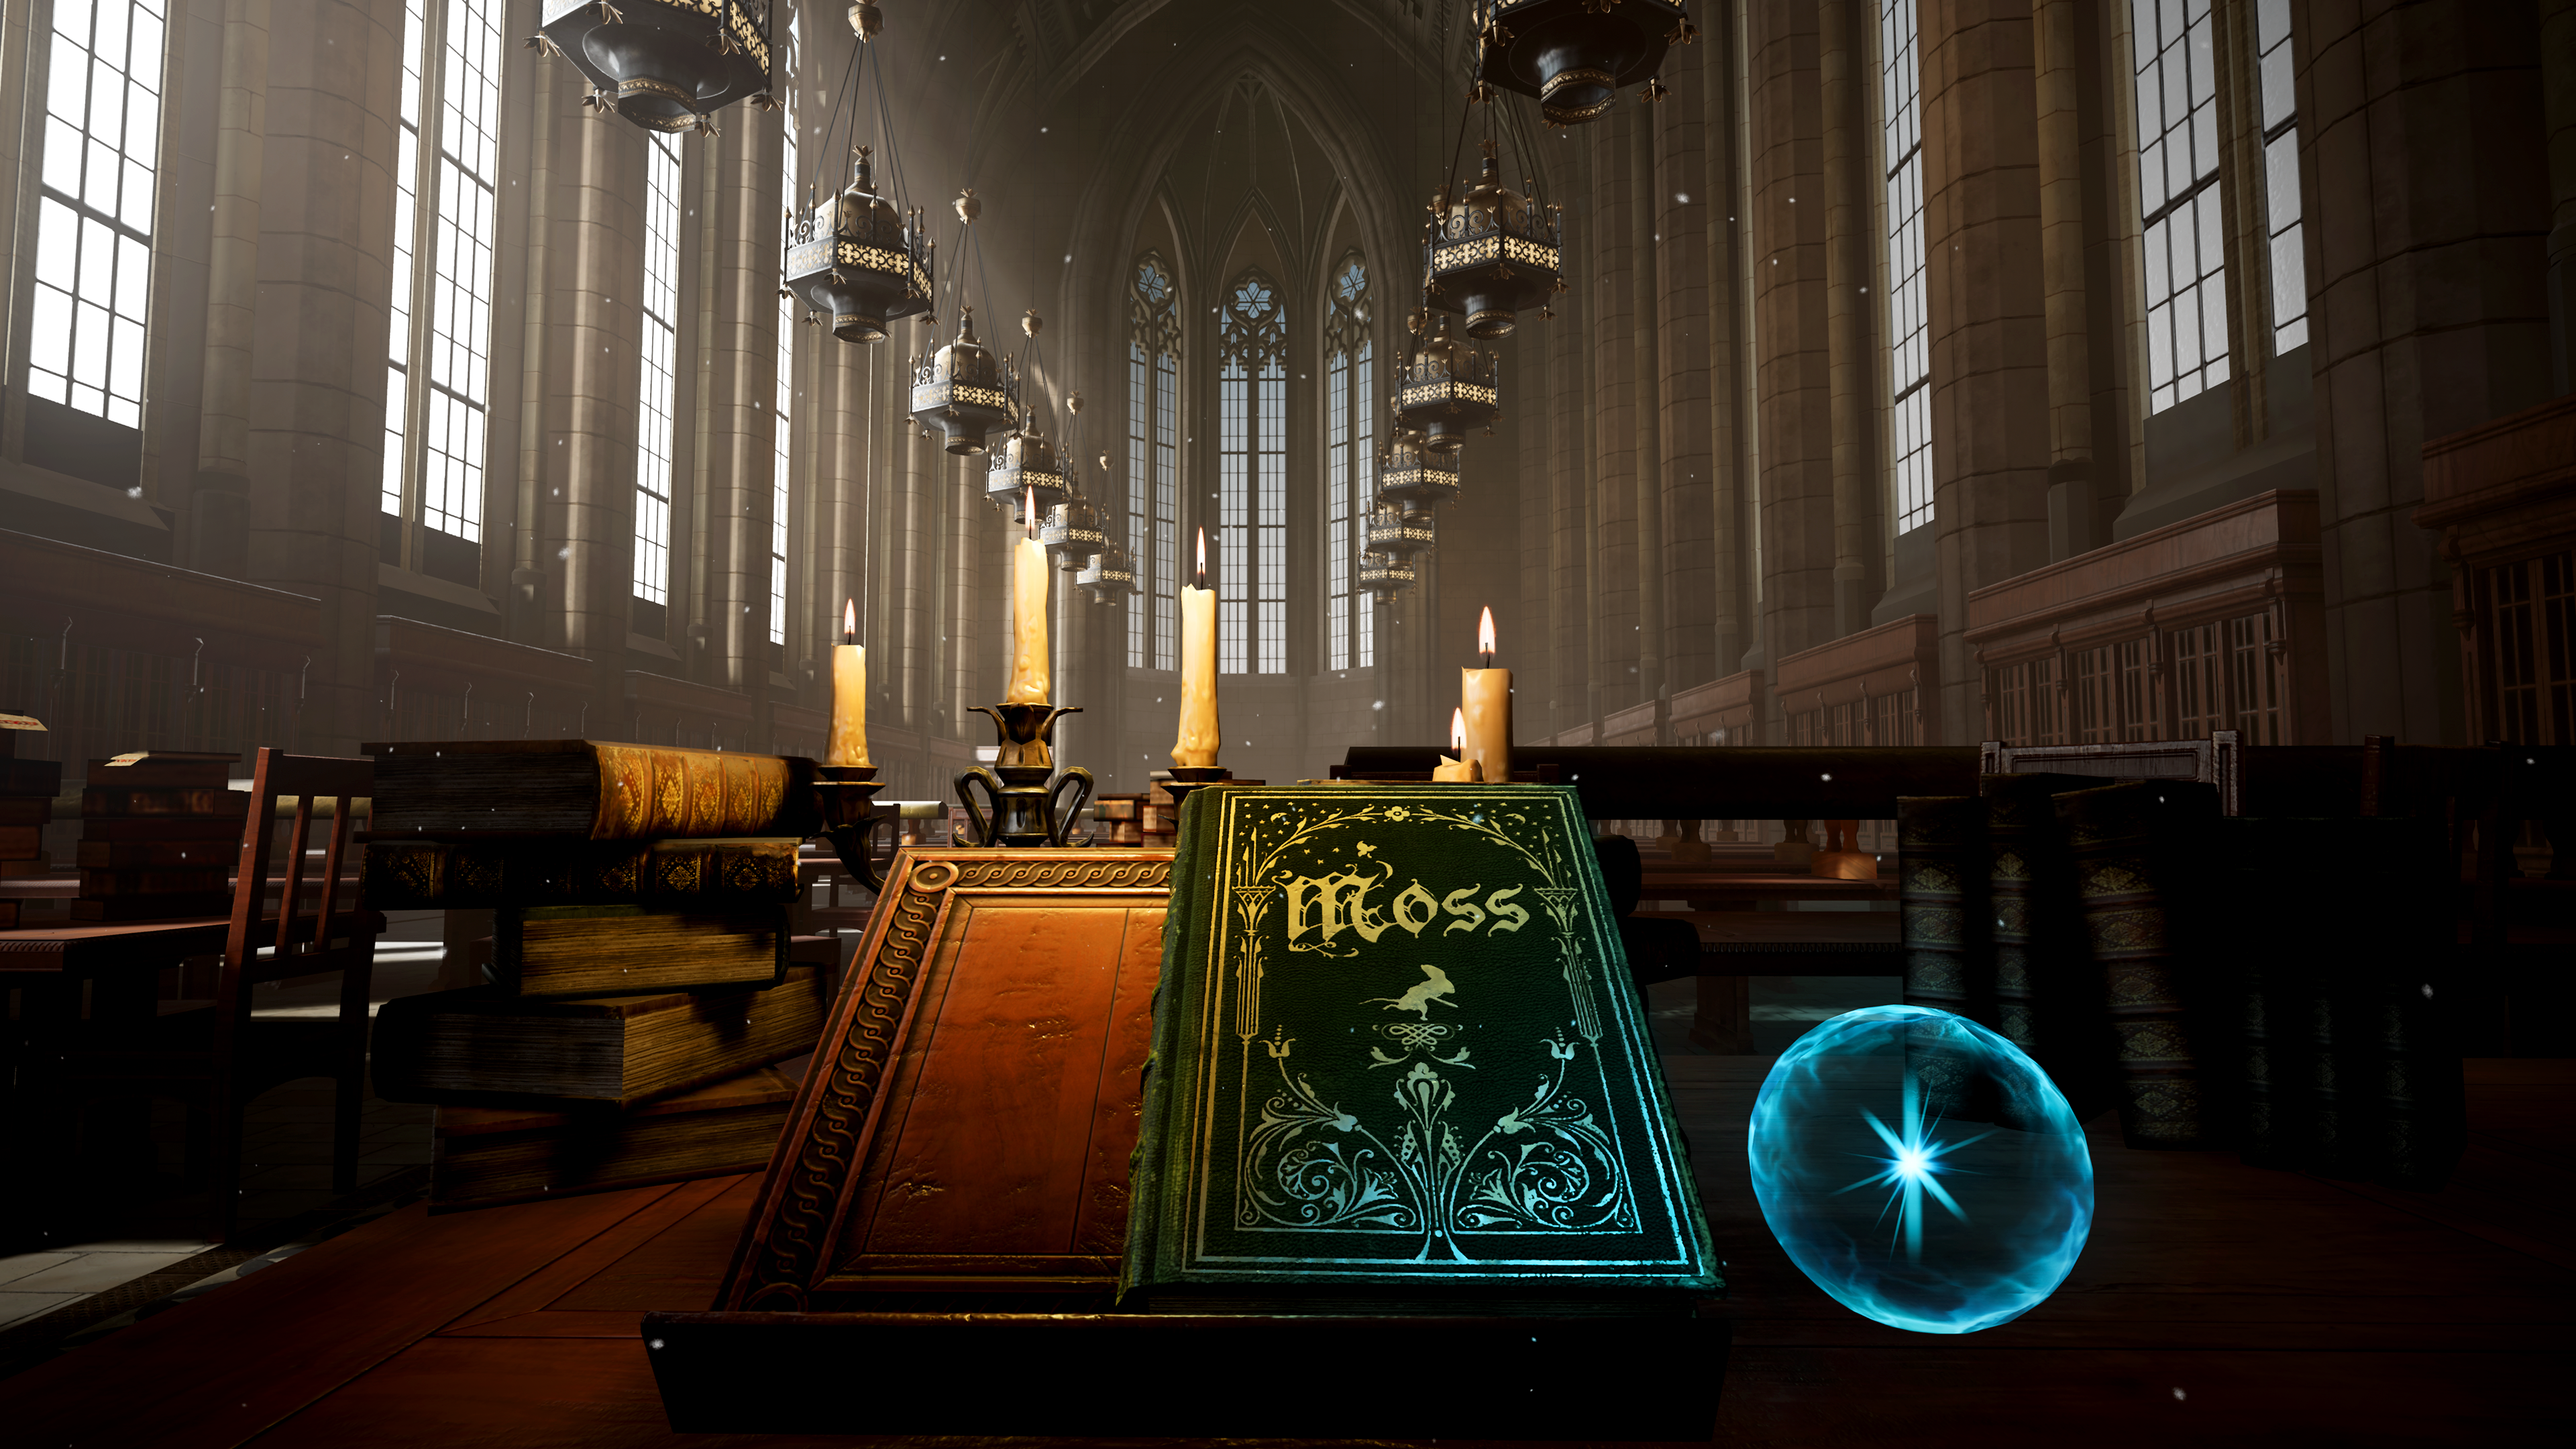 Moss may be just the first book available to The Reader in this library